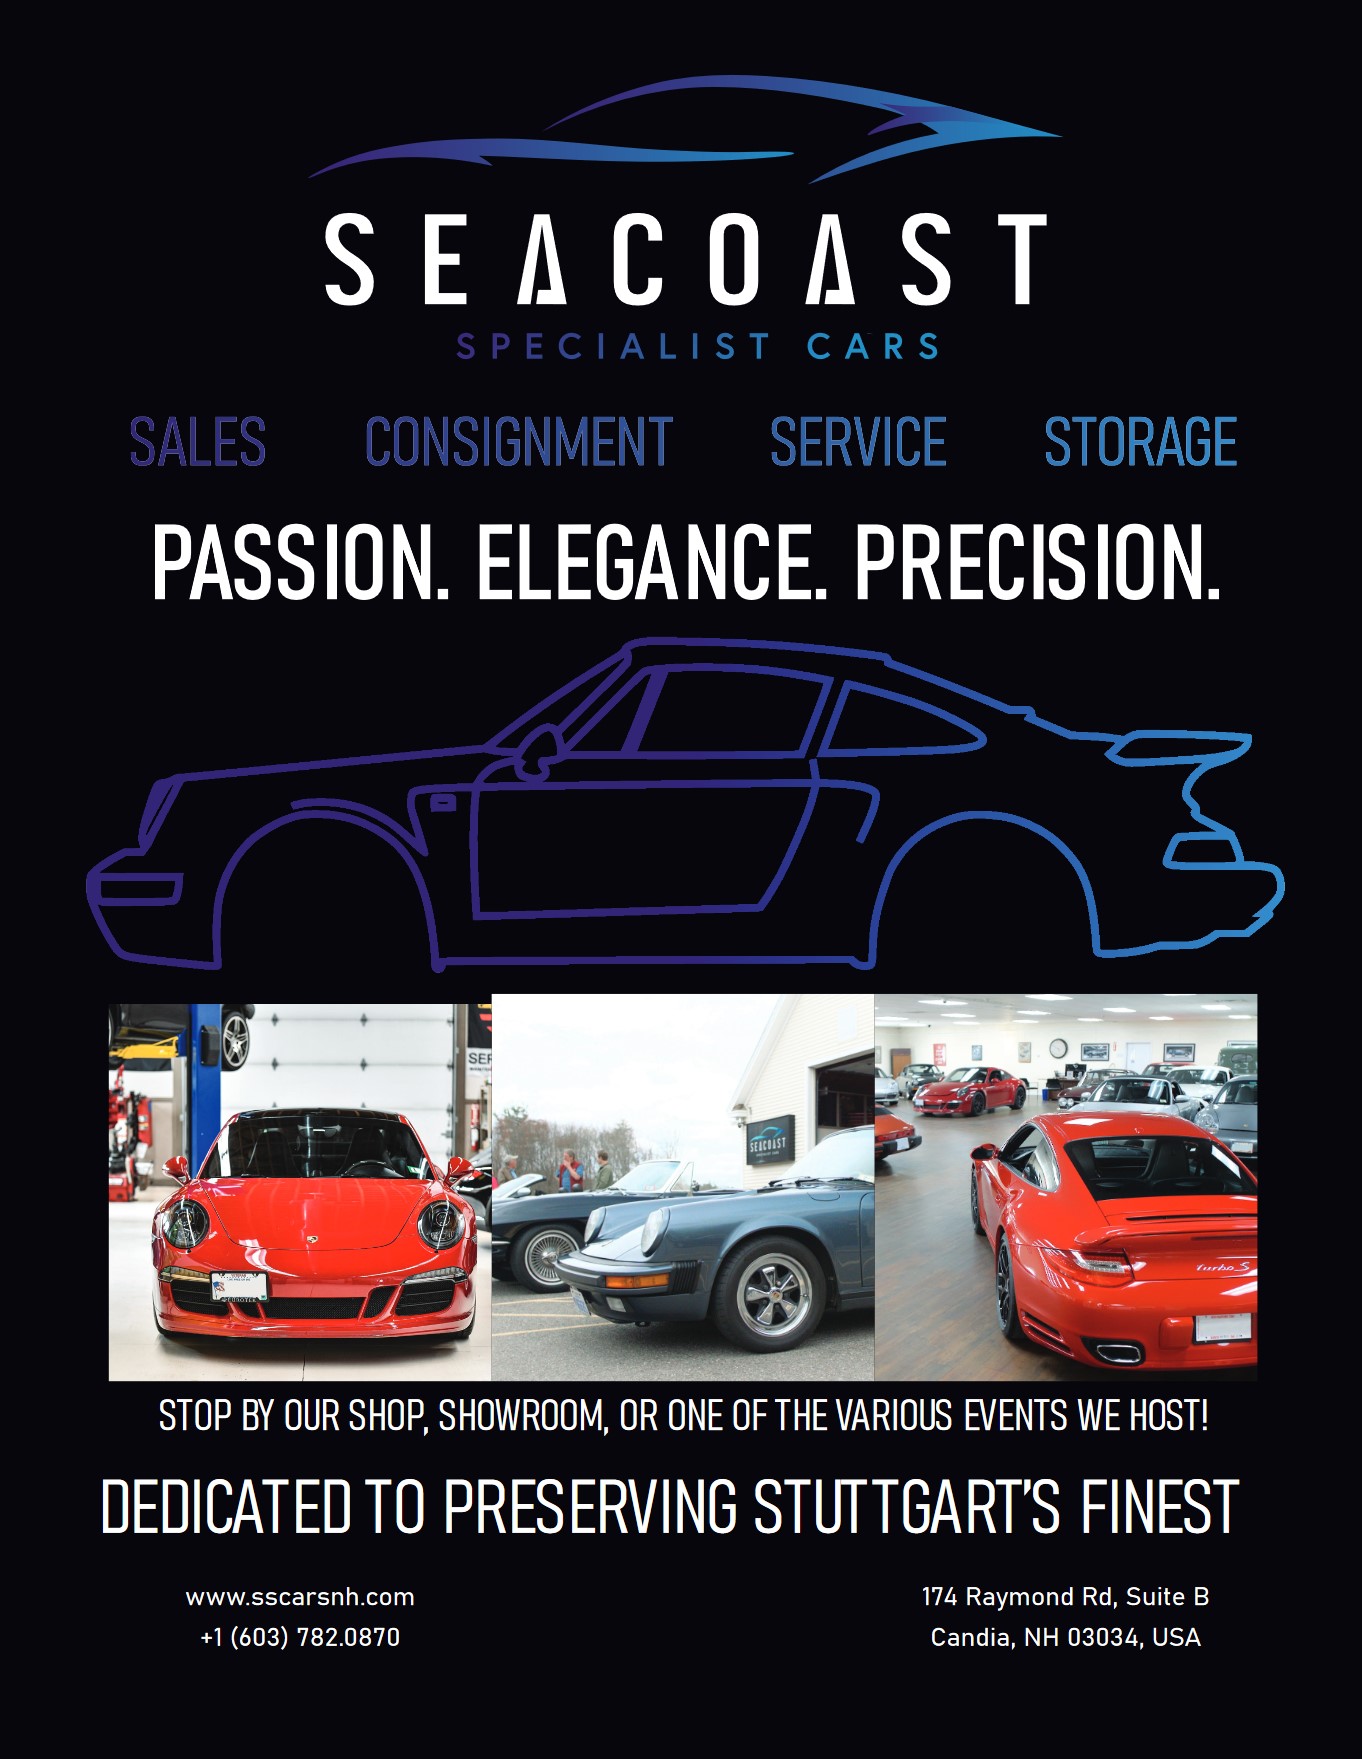 Seacoast Specialist Cars of New Hampshire